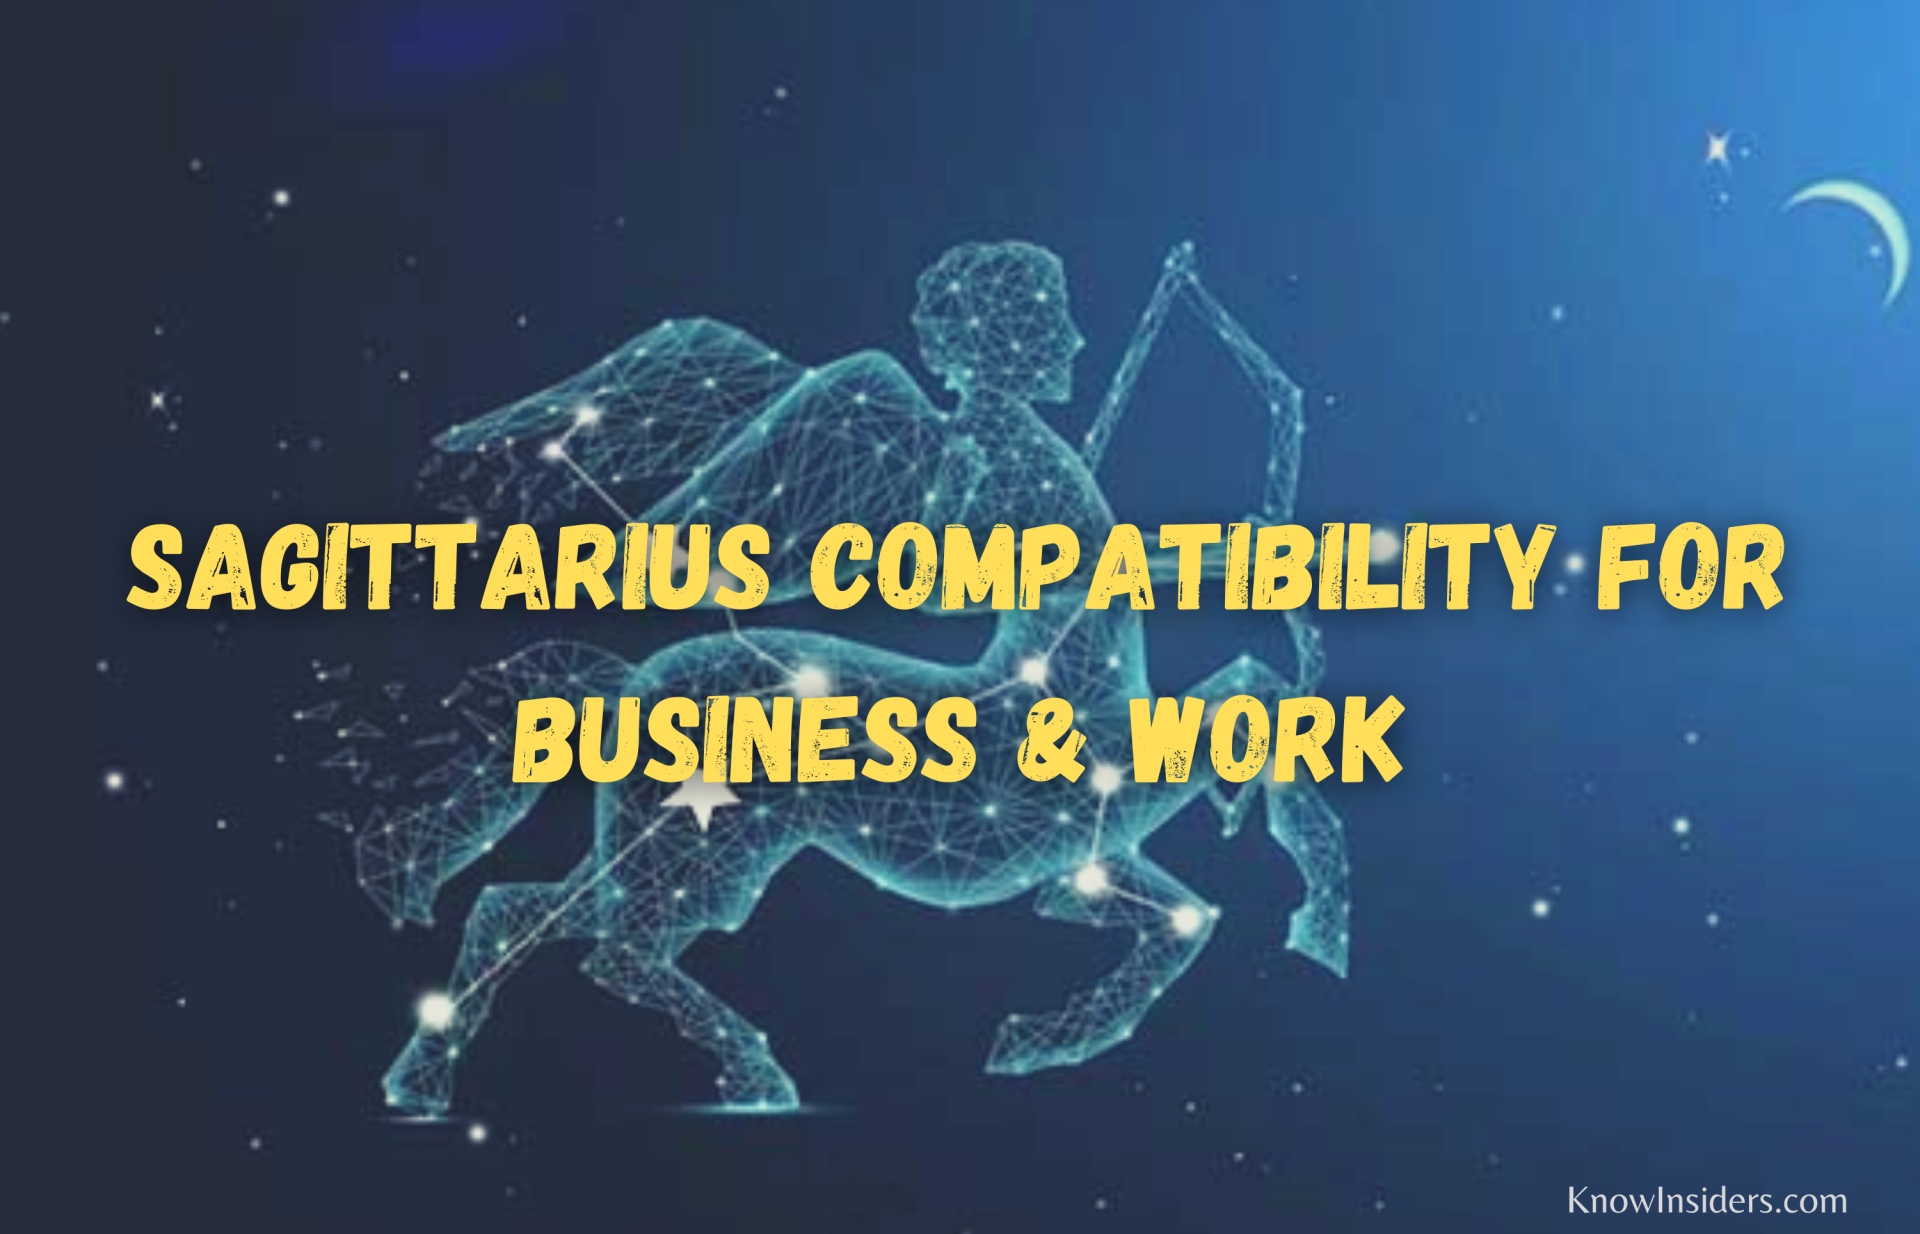 SAGITTARIUS - Top 3 Most Compatible Zodiac Signs in Business & Work